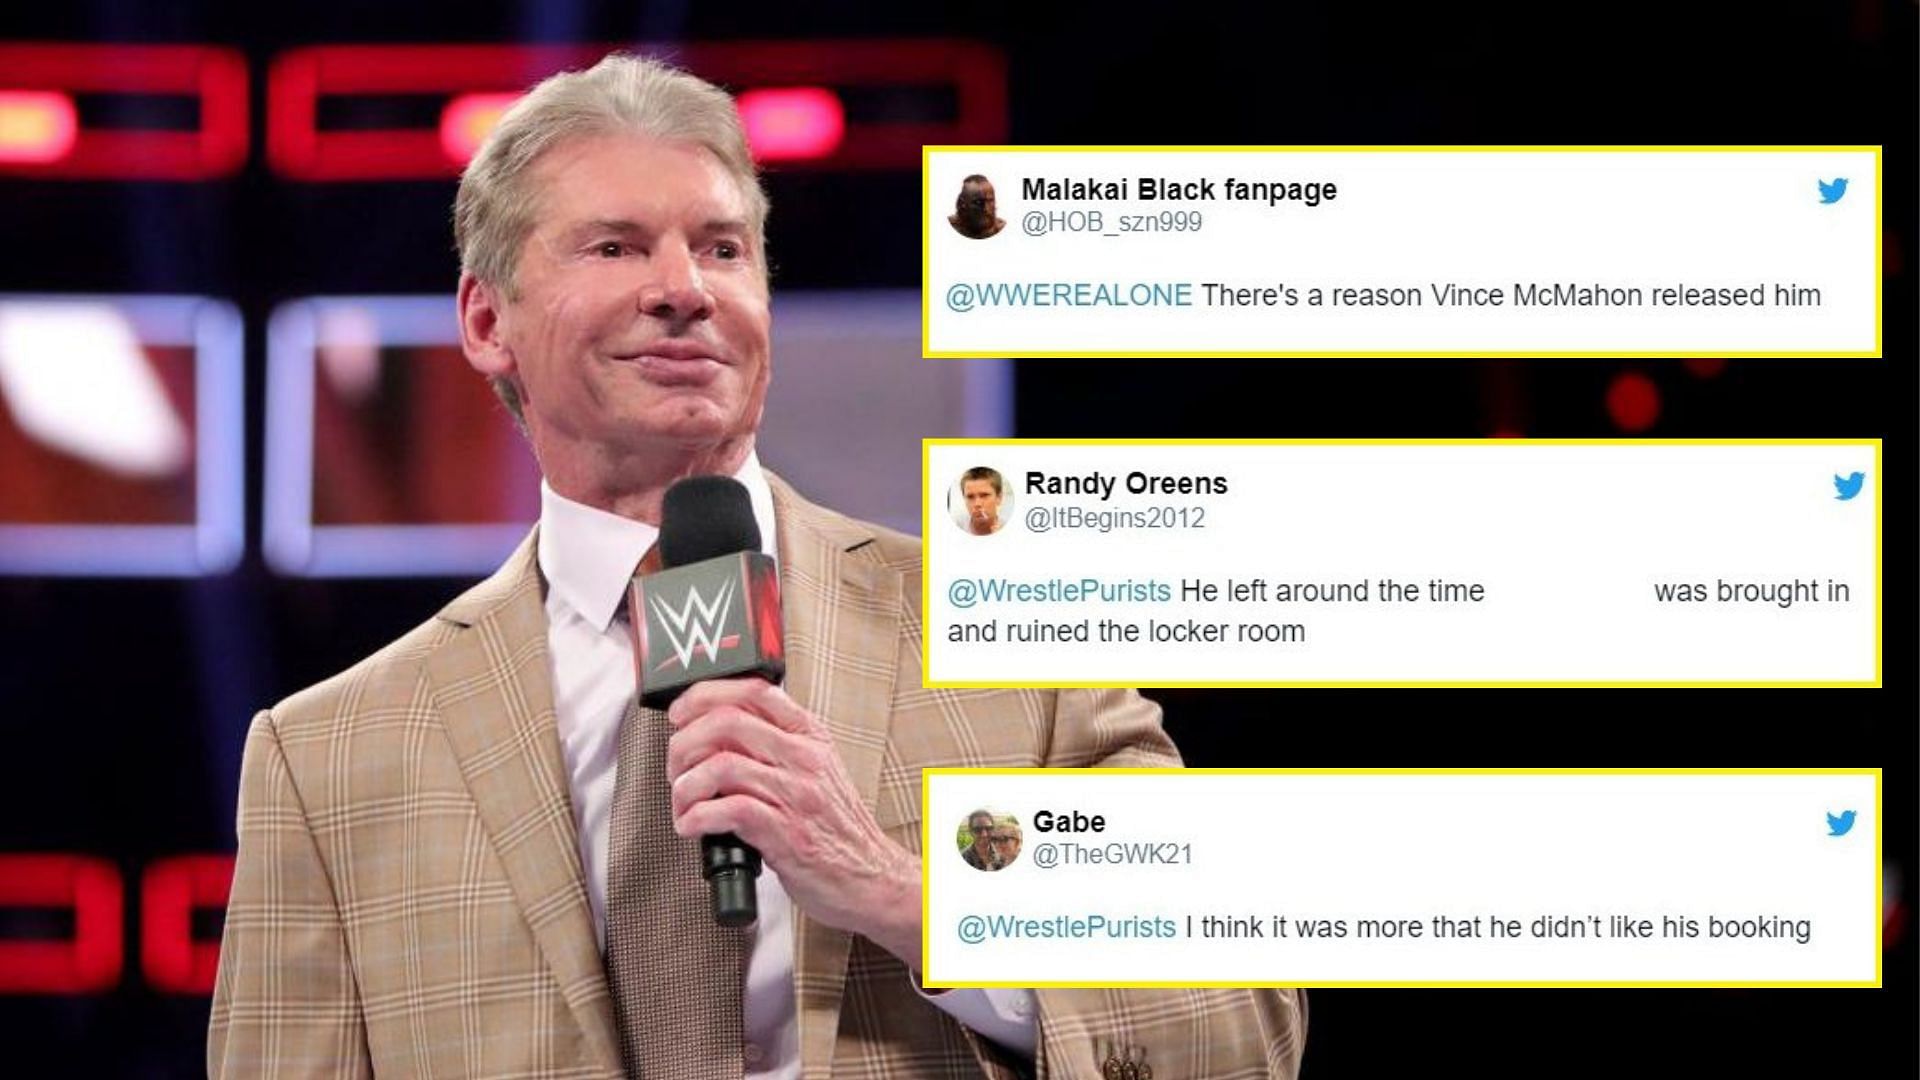 Vince McMahon made his return to the company after retiring last year